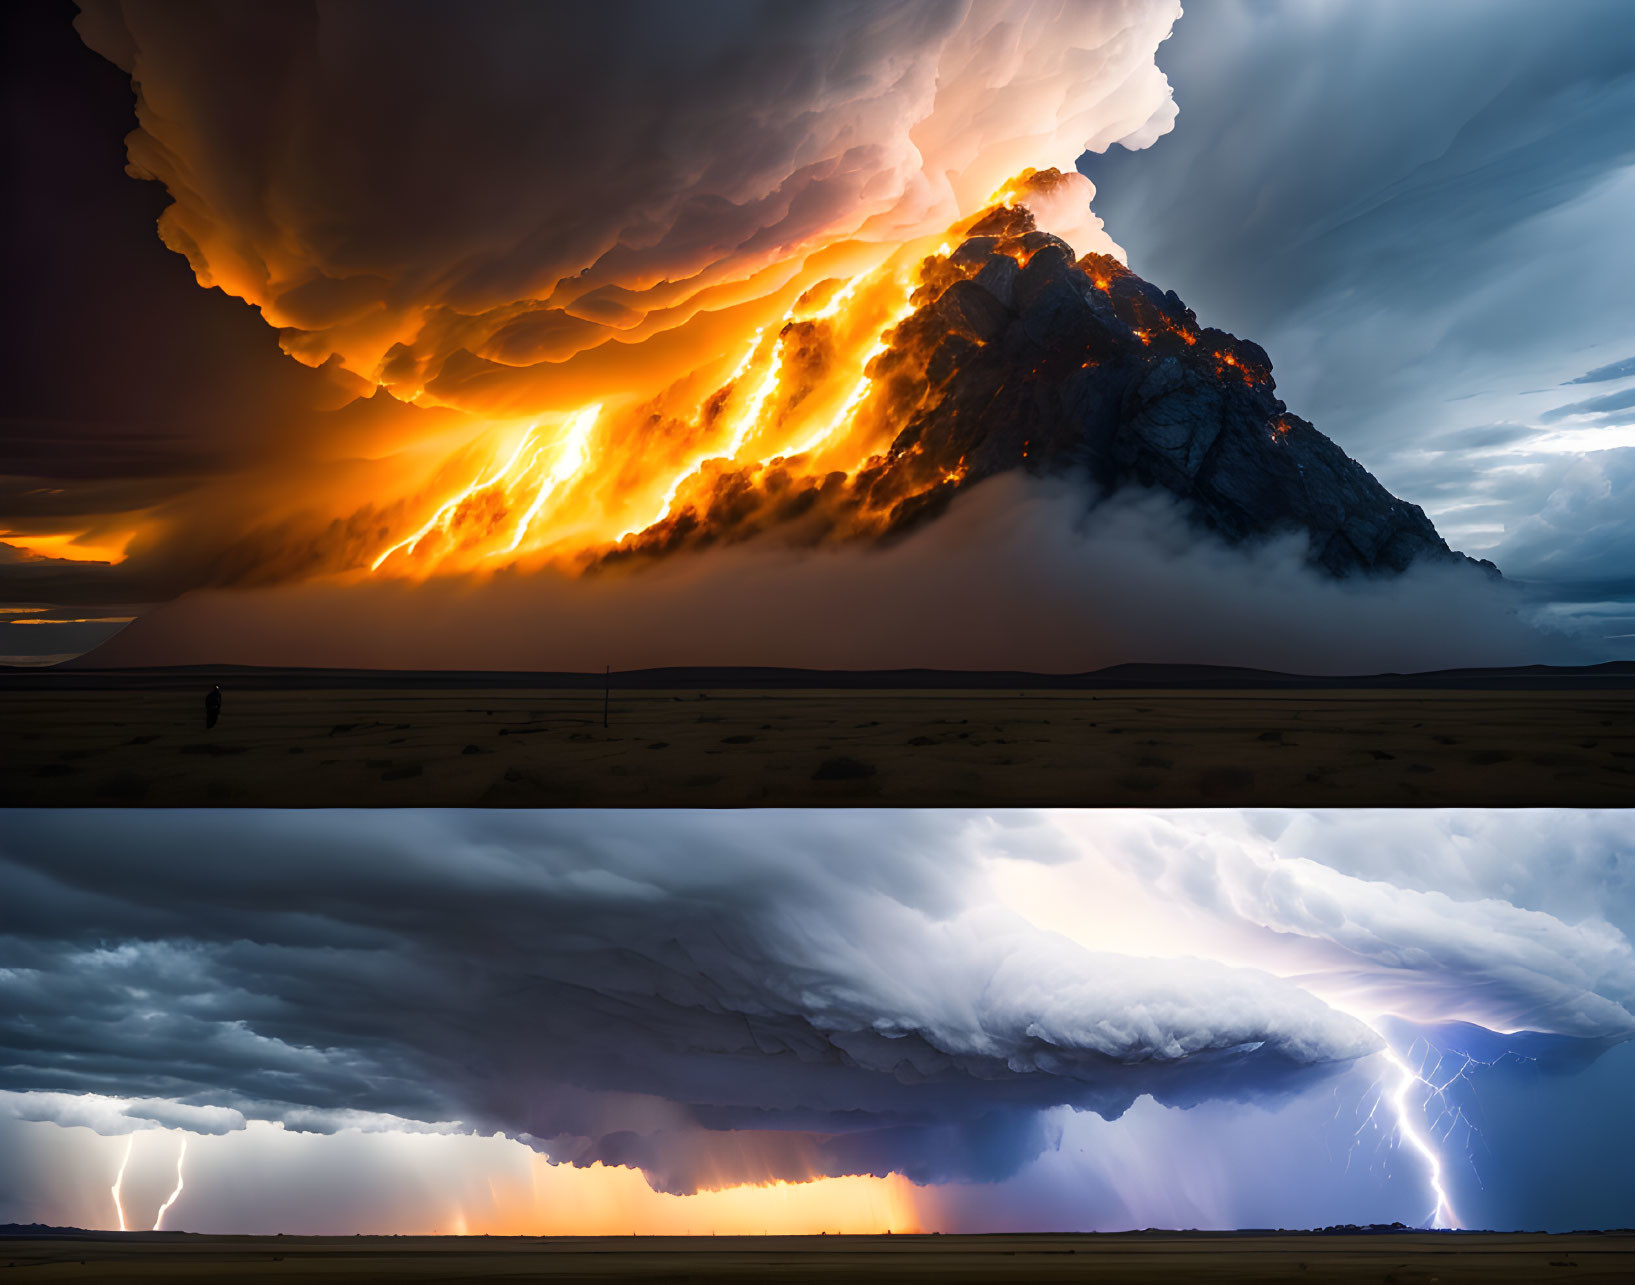 Composite Mountain Image with Dramatic Skies: Fiery Clouds, Dense Fog, Thunderstorm